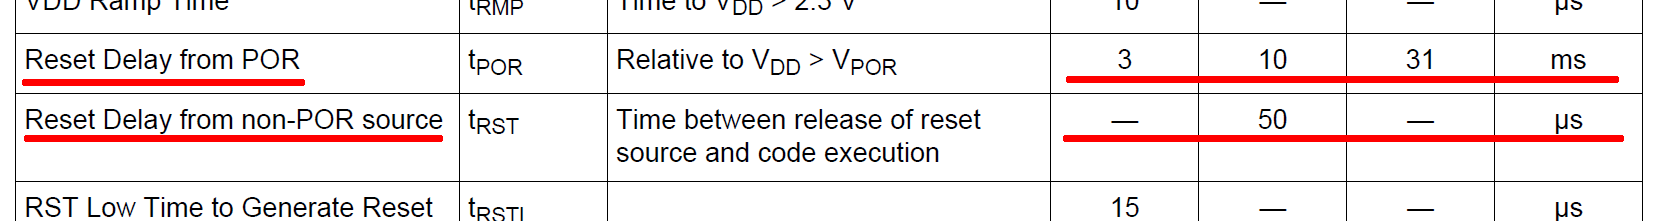 Time between reset and code execution